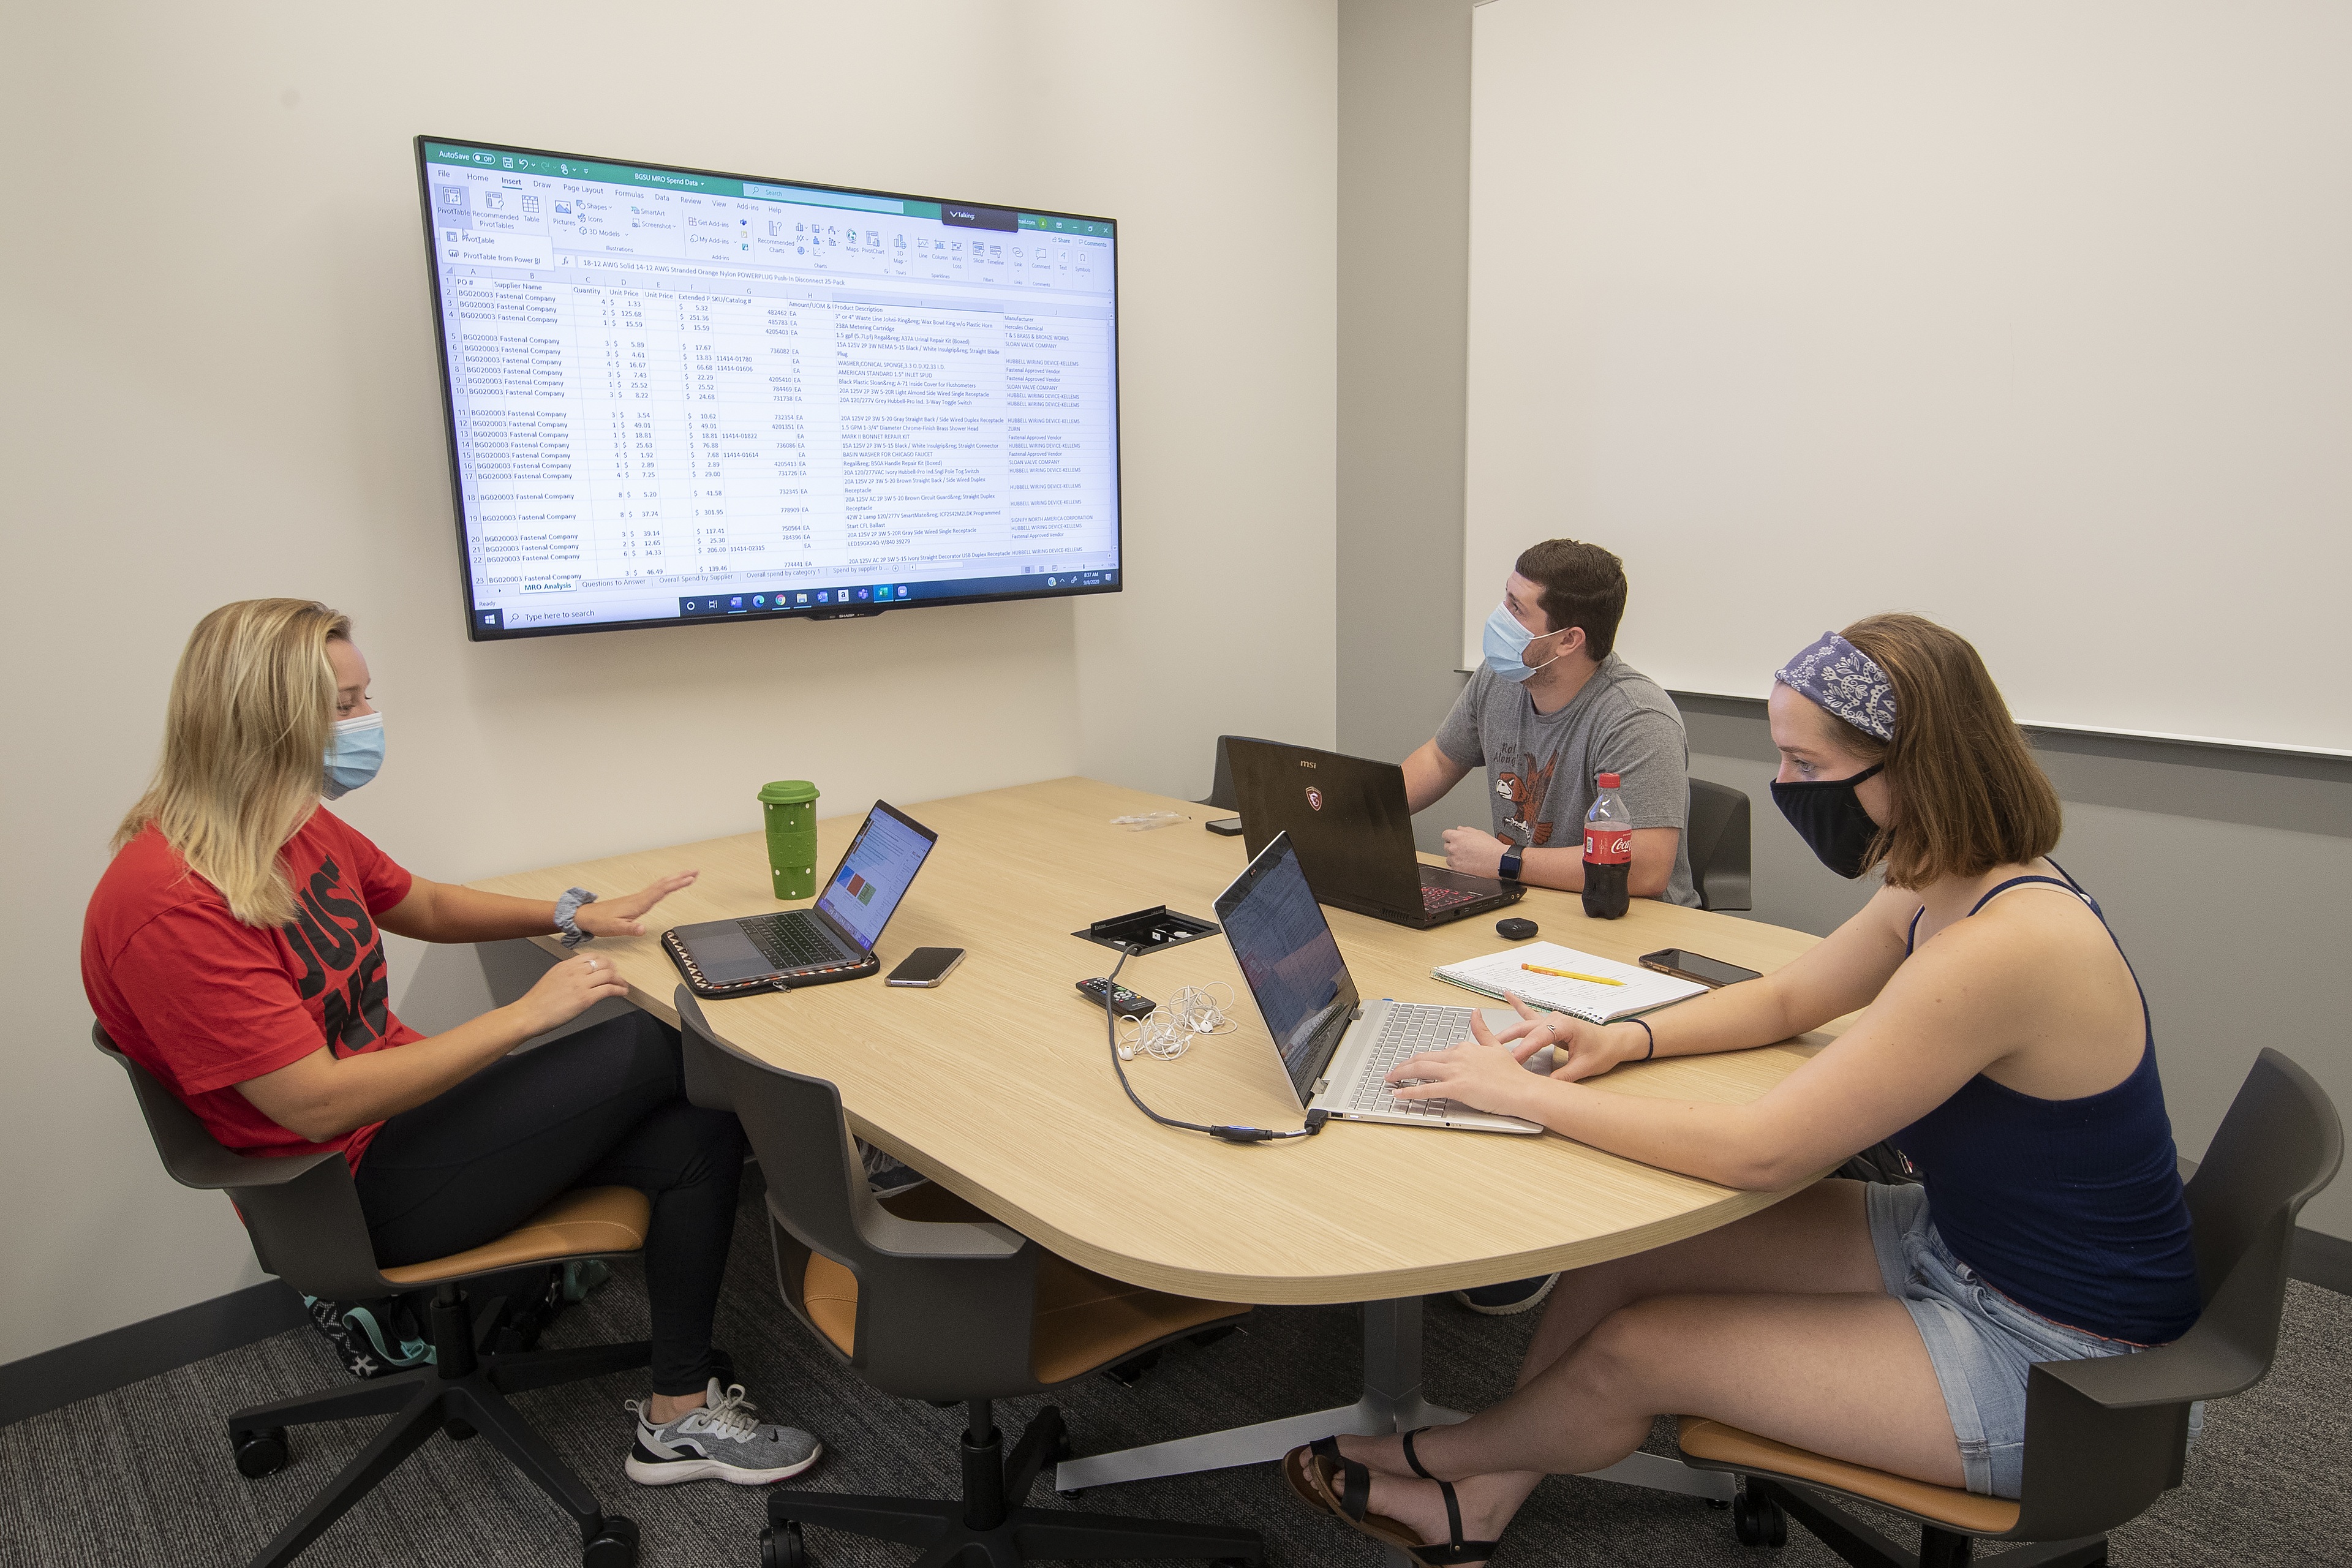  Supply chain management students Quincy Rable (left) from St Mary’s, Ohio, Allison Nevison (right) from Middlefield, Ohio, and Justin Allsop (center), from Findlay, Ohio work on a project in a new collaboration space..